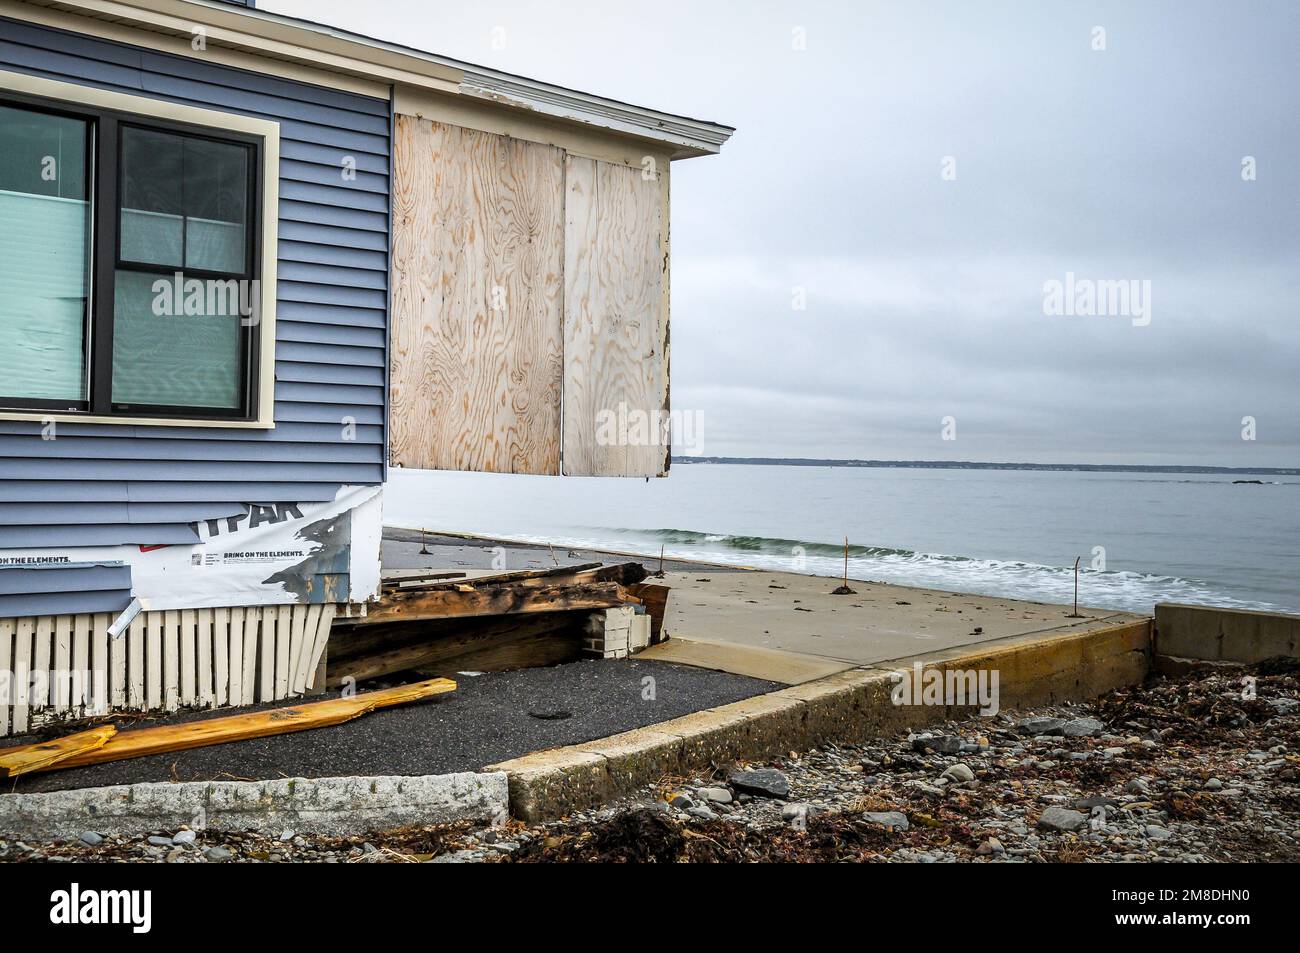 The first major storm of the year lasted for two days, and washed away part of this home. It hit so hard that it took most of the wood  out to sea. Stock Photo